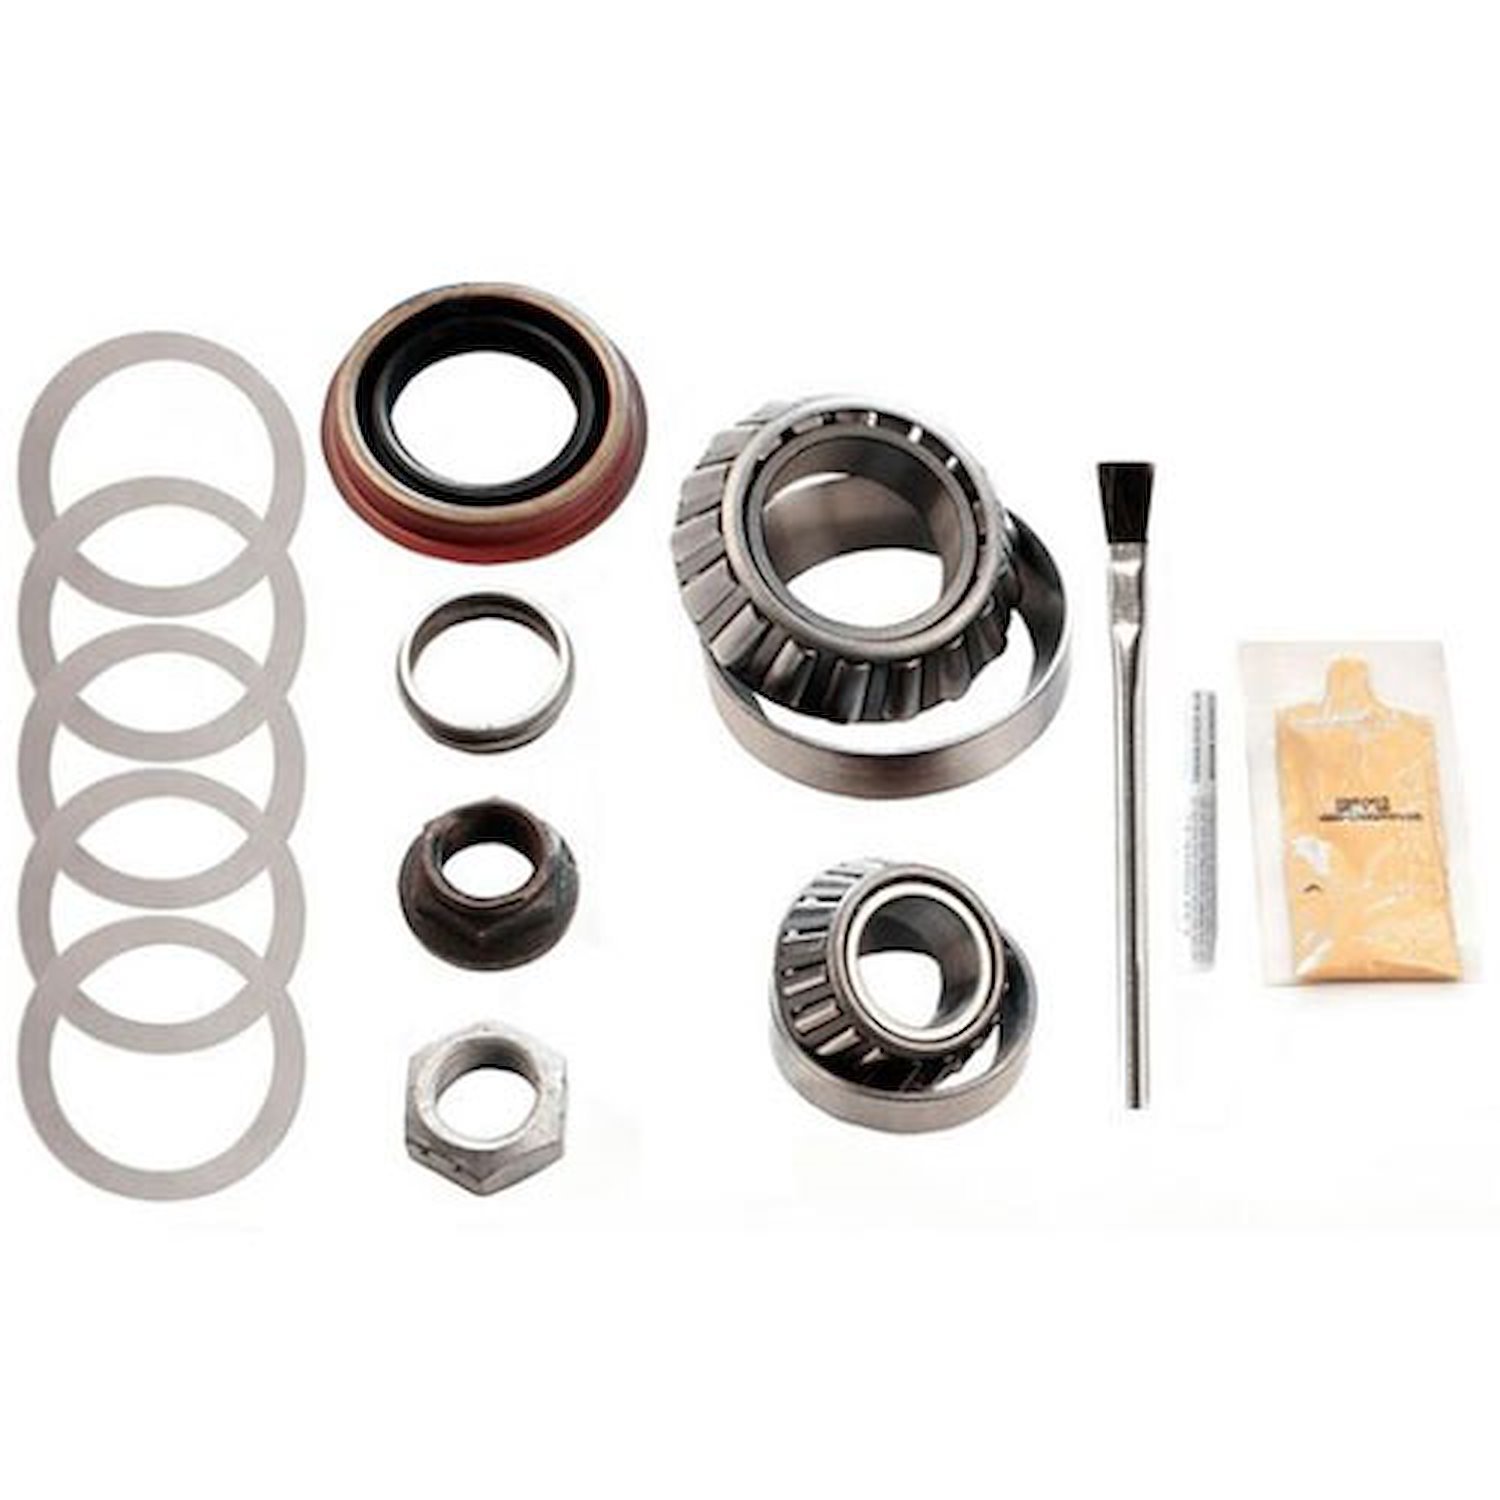 Differential Pinion Bearing Kit Ford 9.75 in. 12-bolt - Koyo Bearings